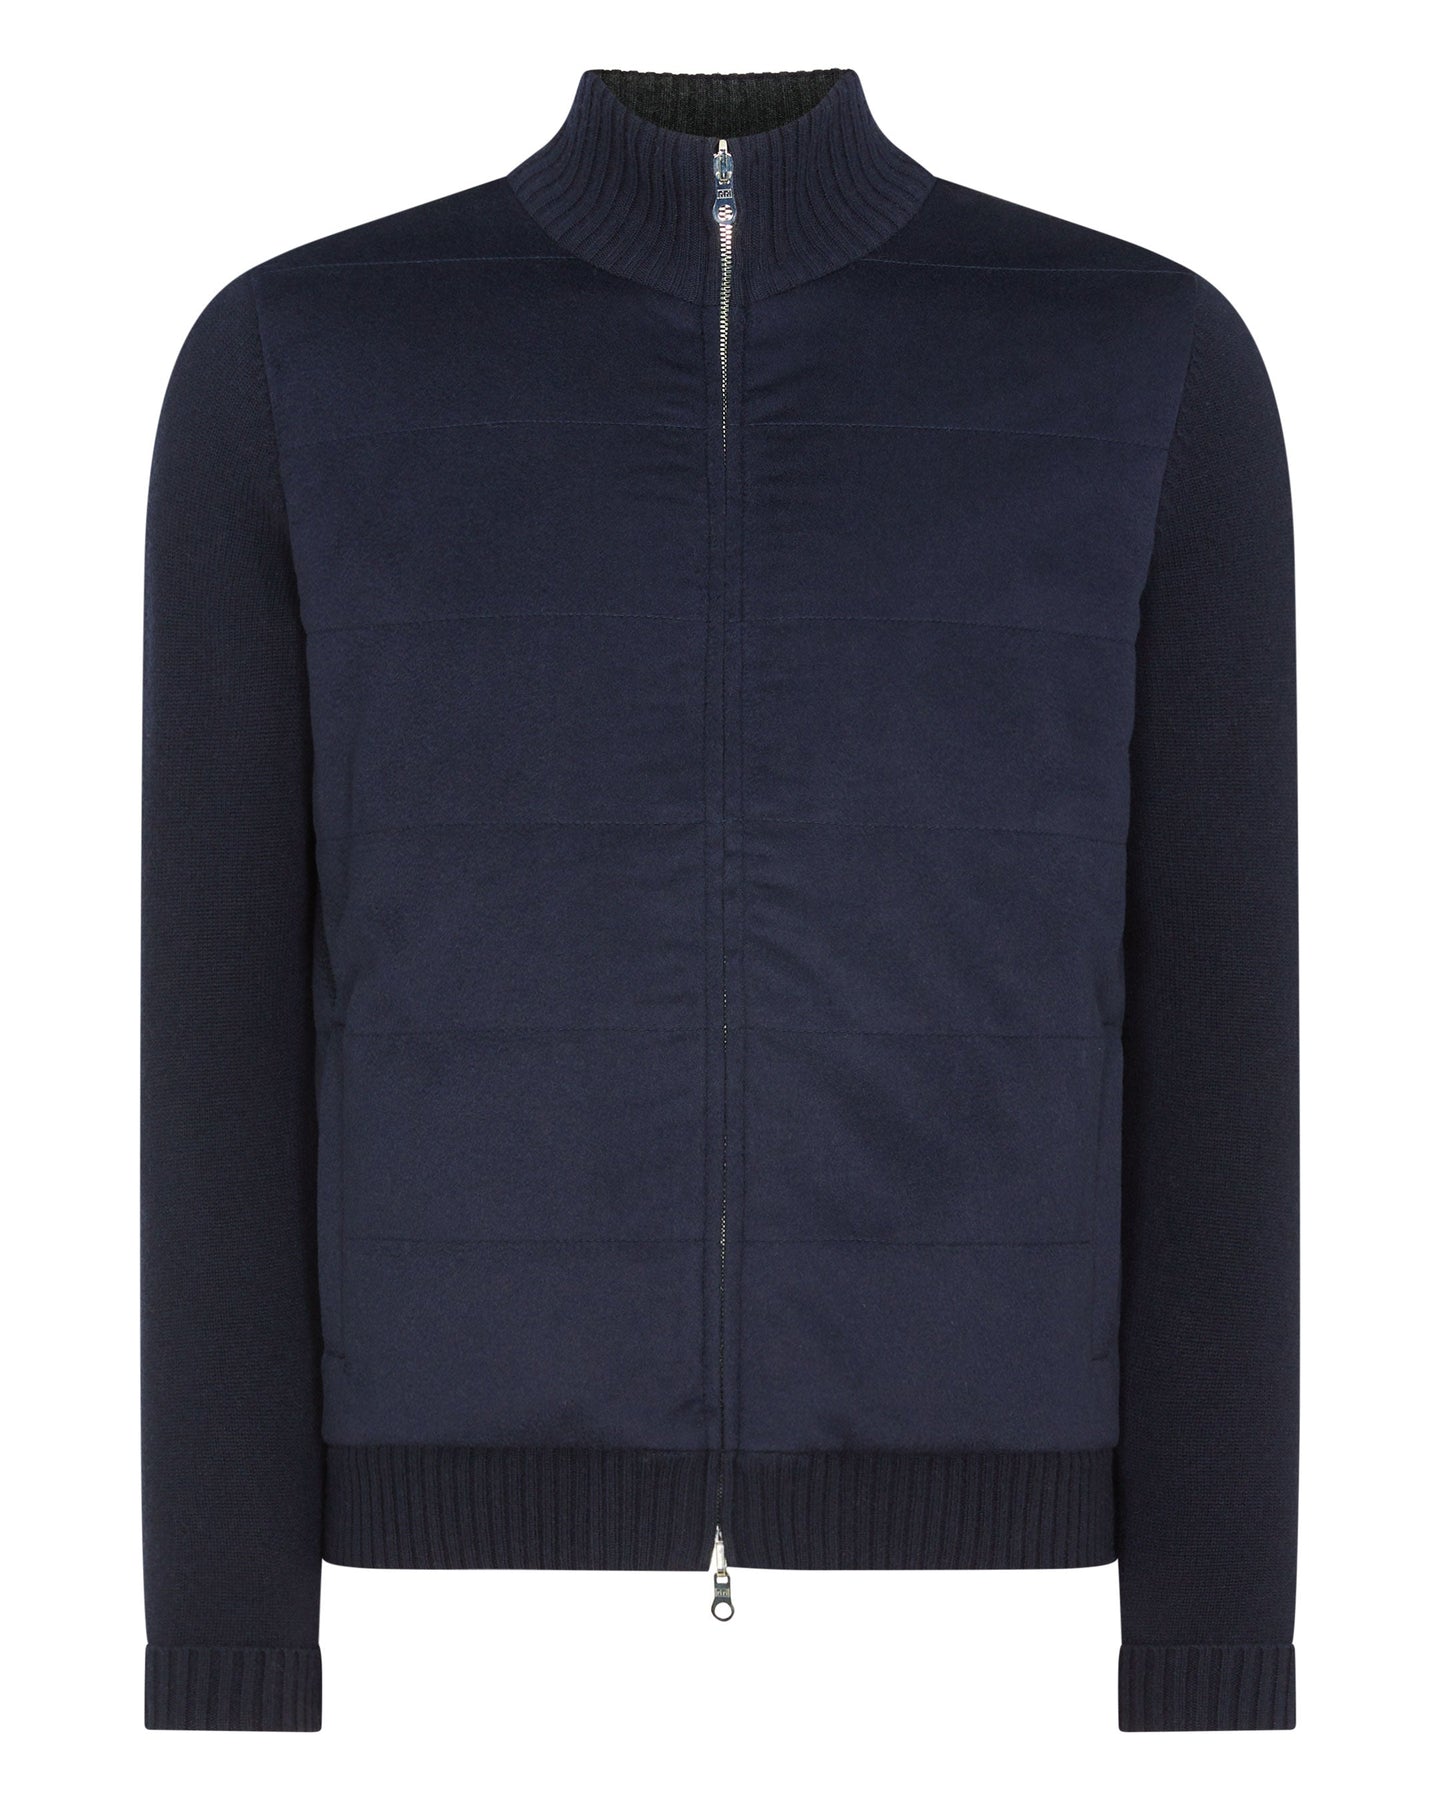 N.Peal Men's Cashmere Woven Front Jacket Navy Blue